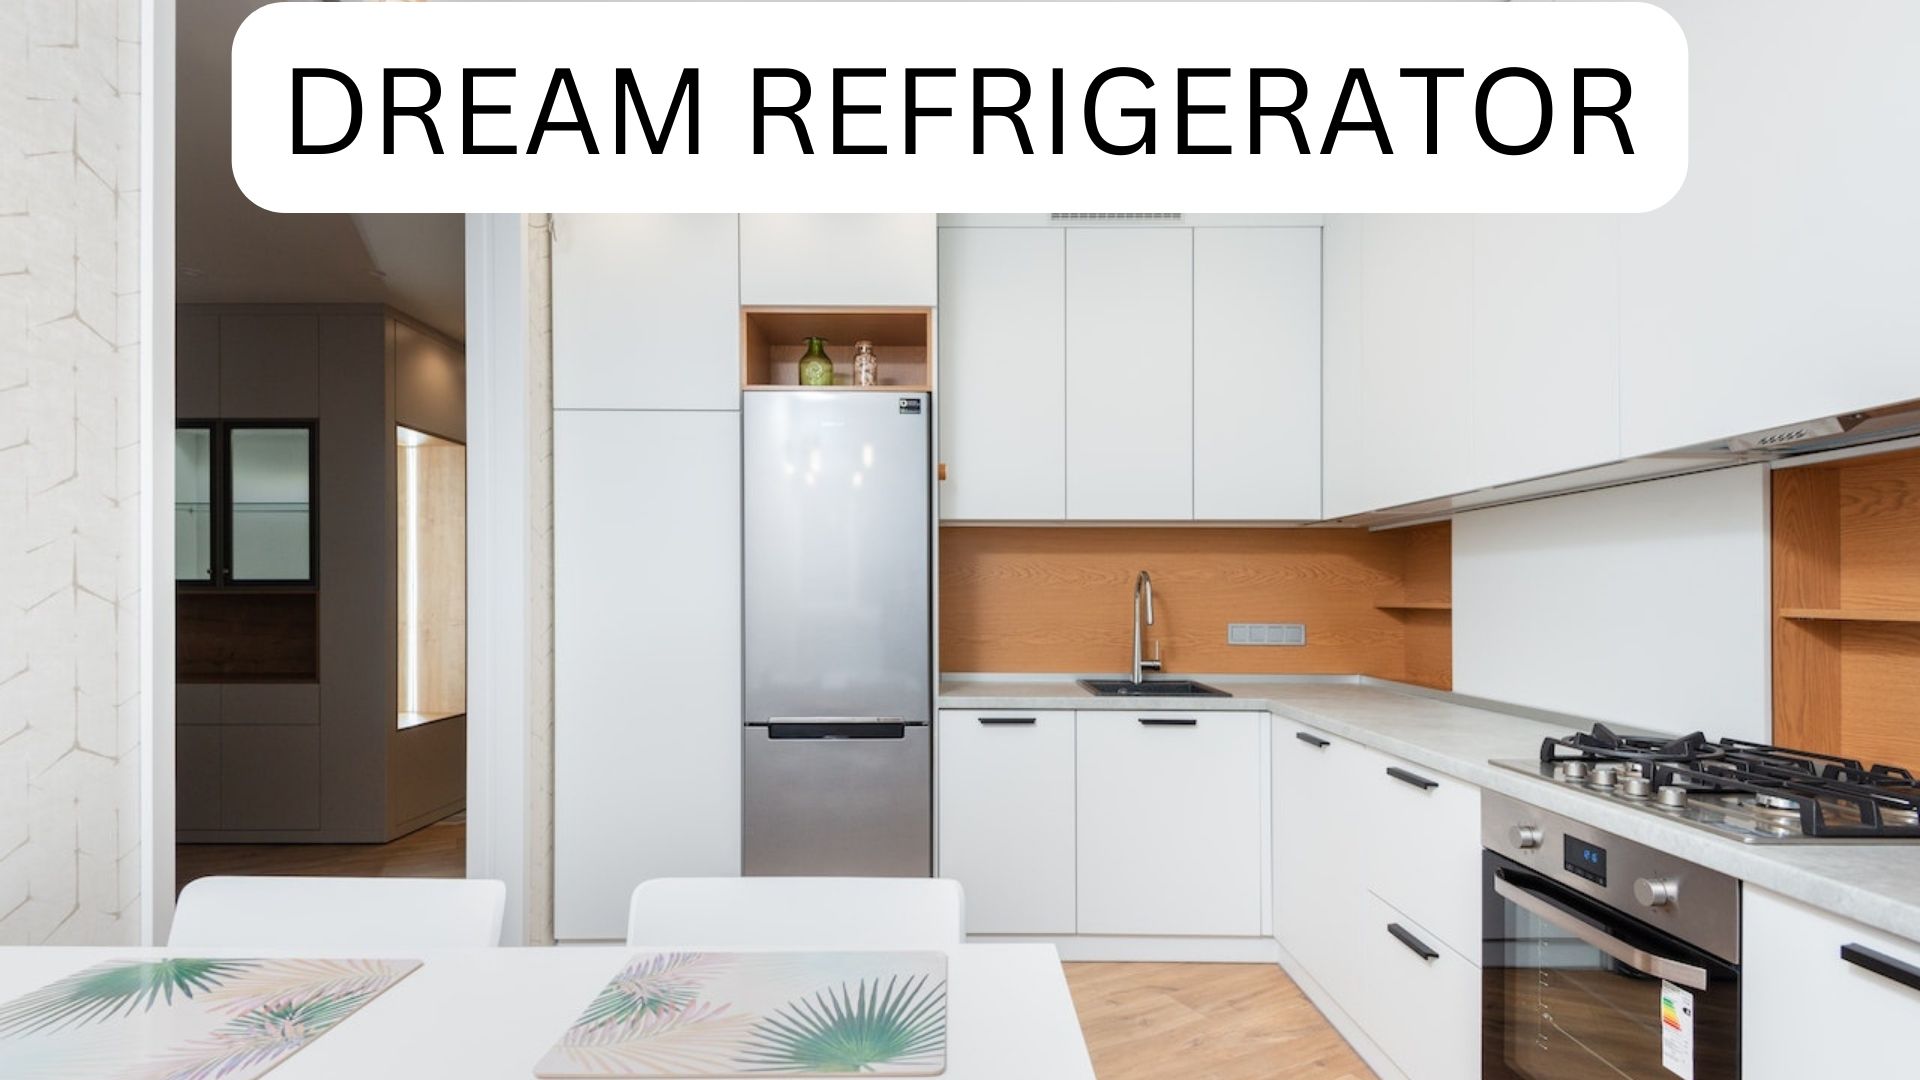 Dream Refrigerator - A Sign Of Goodness And Happy Experiences